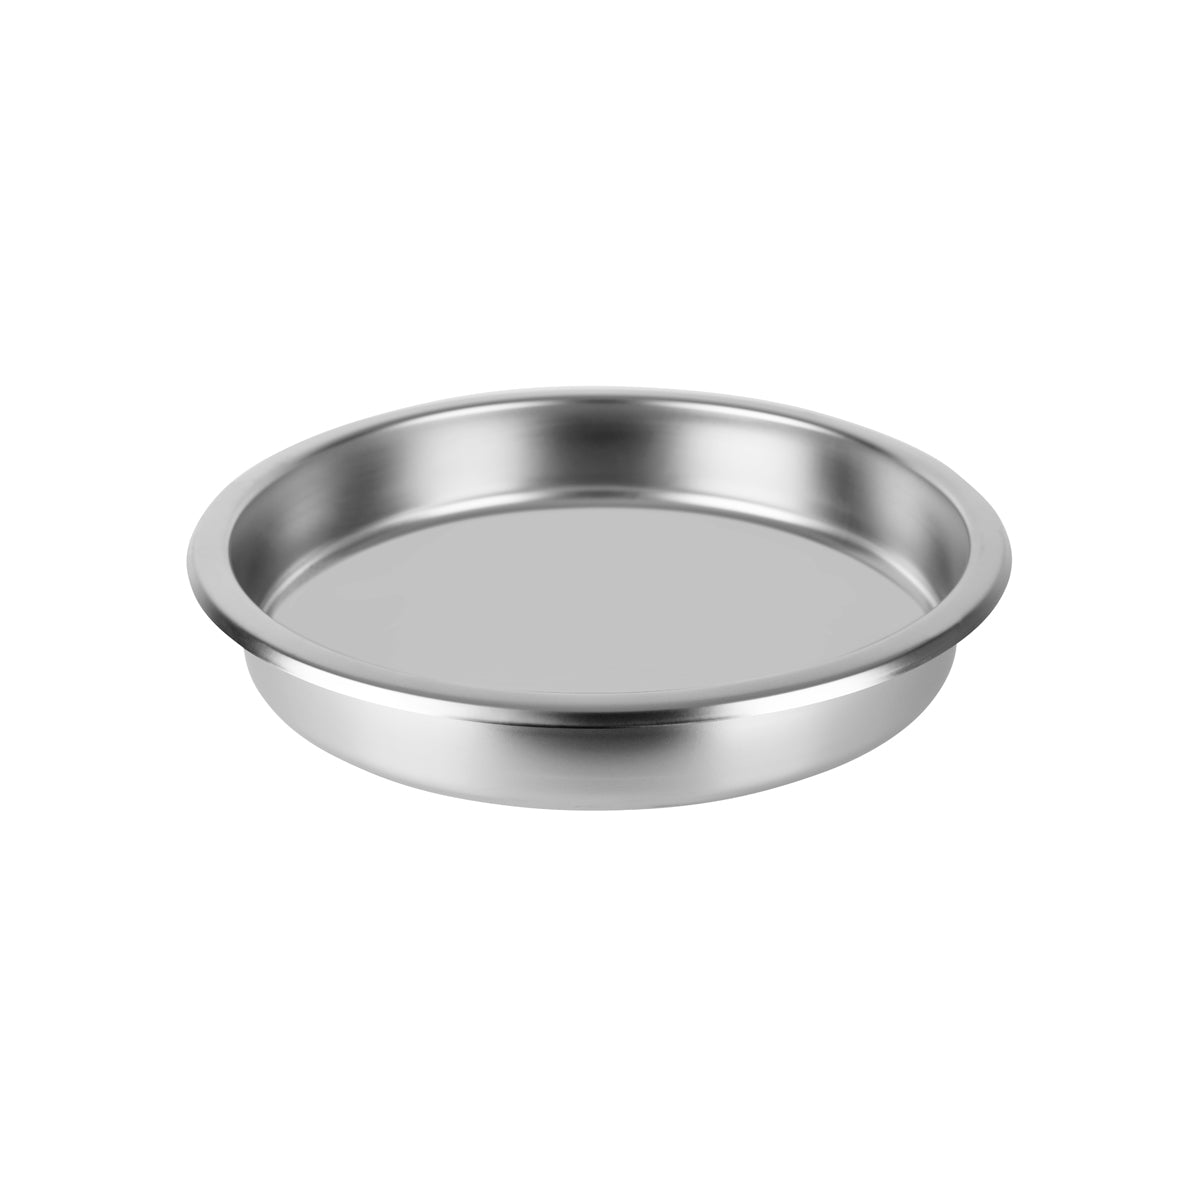 54916-I Chef Inox Round Insert Pan Stainless Steel to Suit 54916 Tomkin Australia Hospitality Supplies